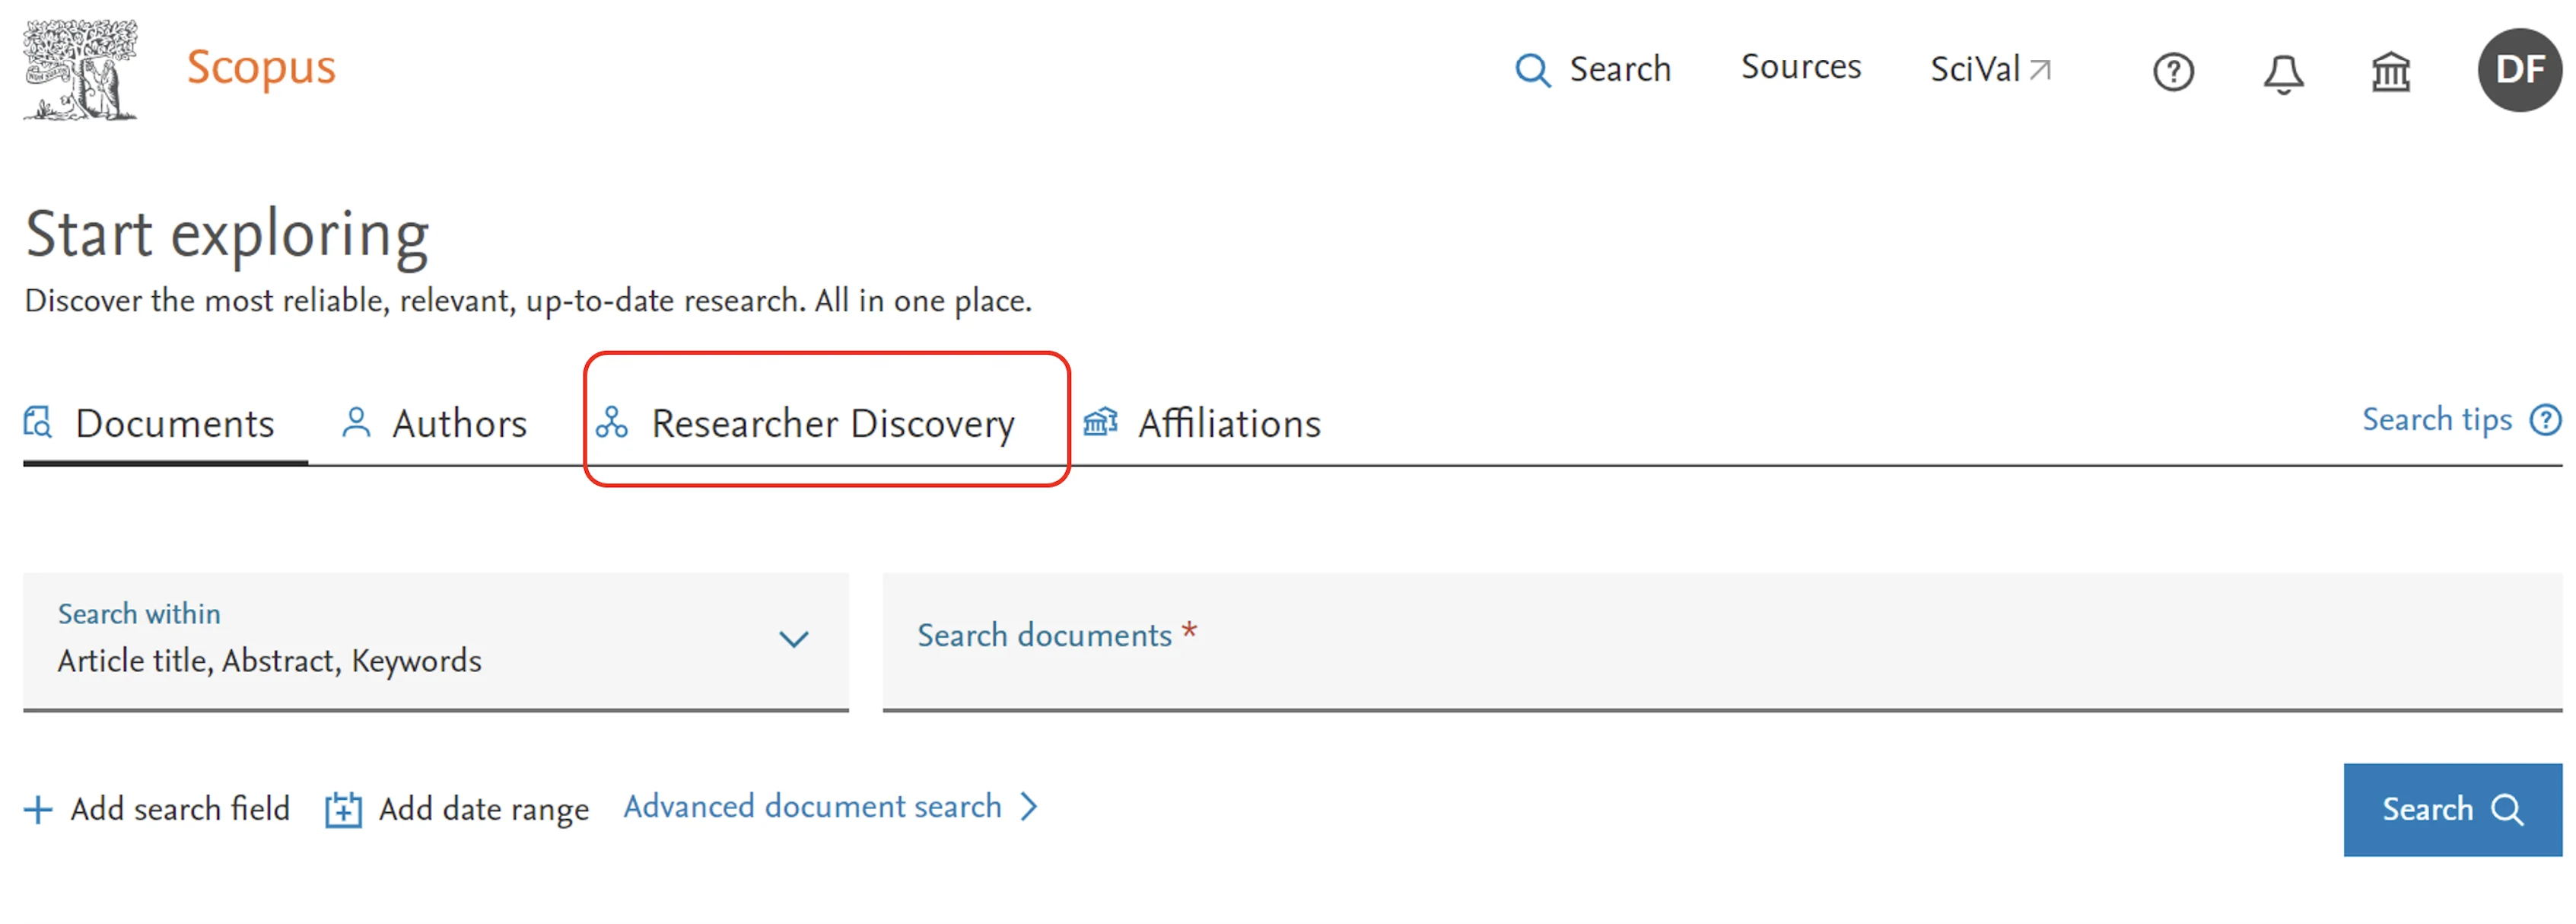 Scopus Researcher Discovery feature